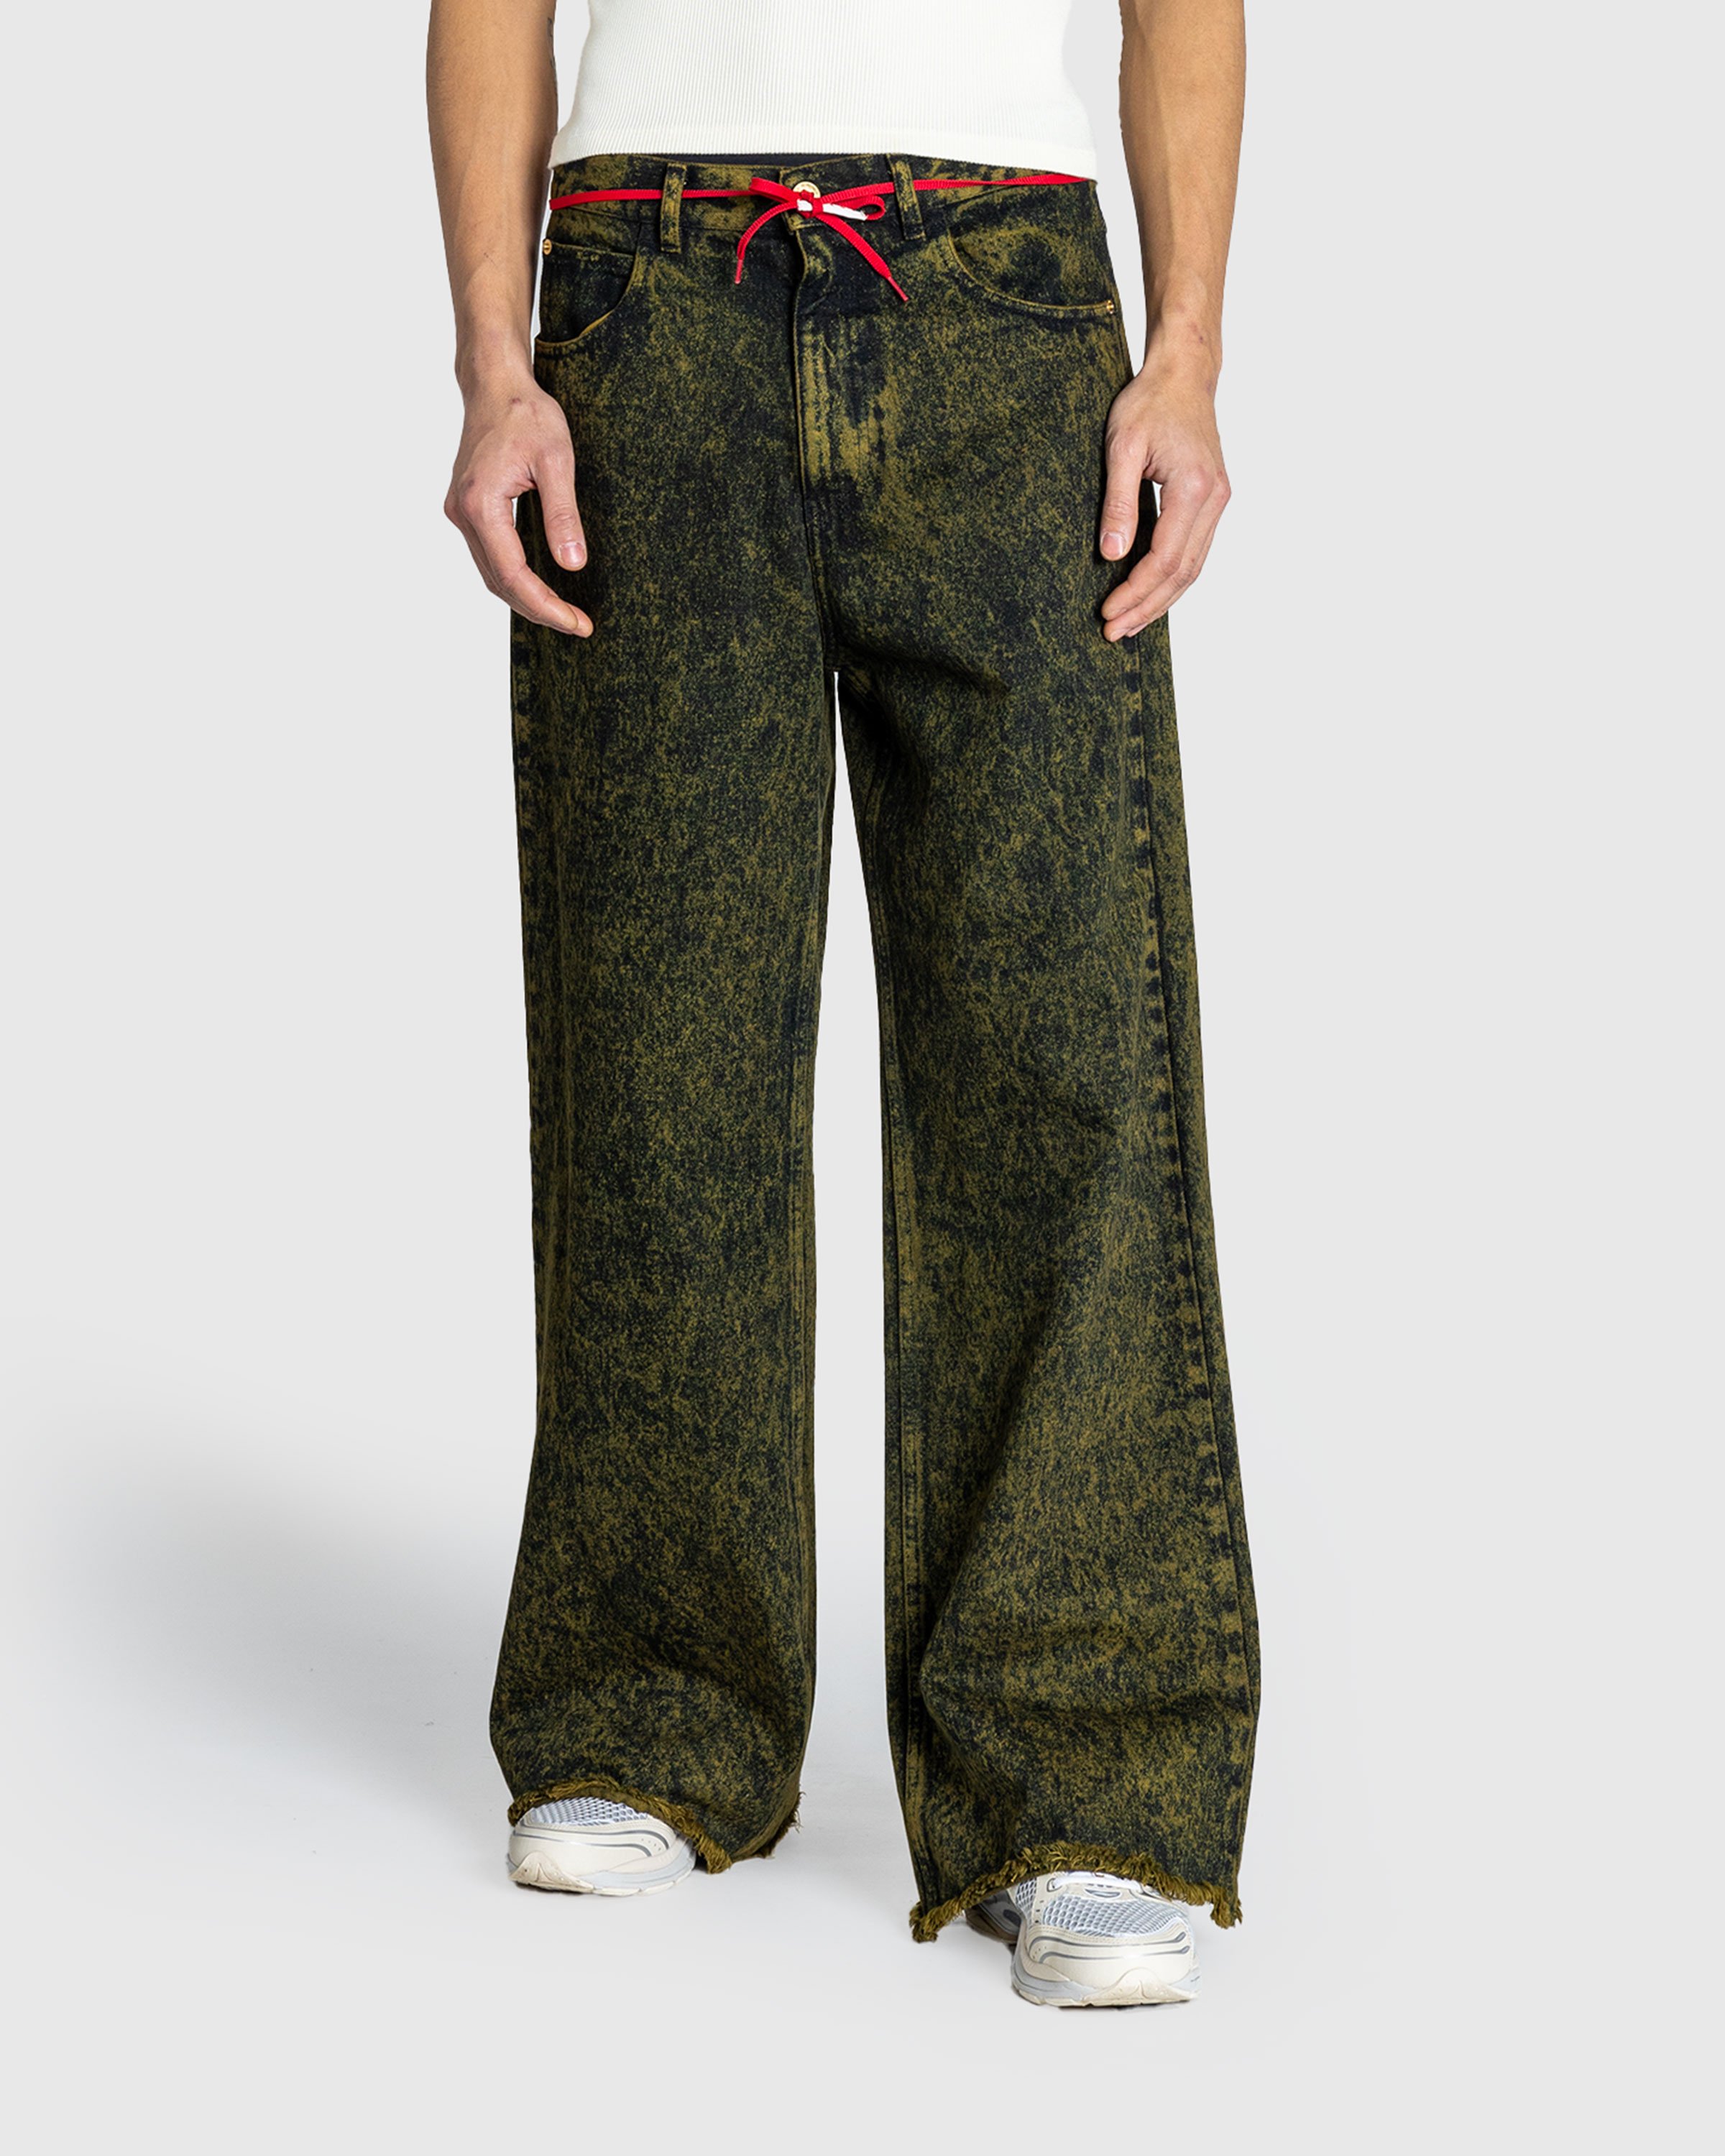 Marni - Trousers Green - Clothing - Green - Image 2